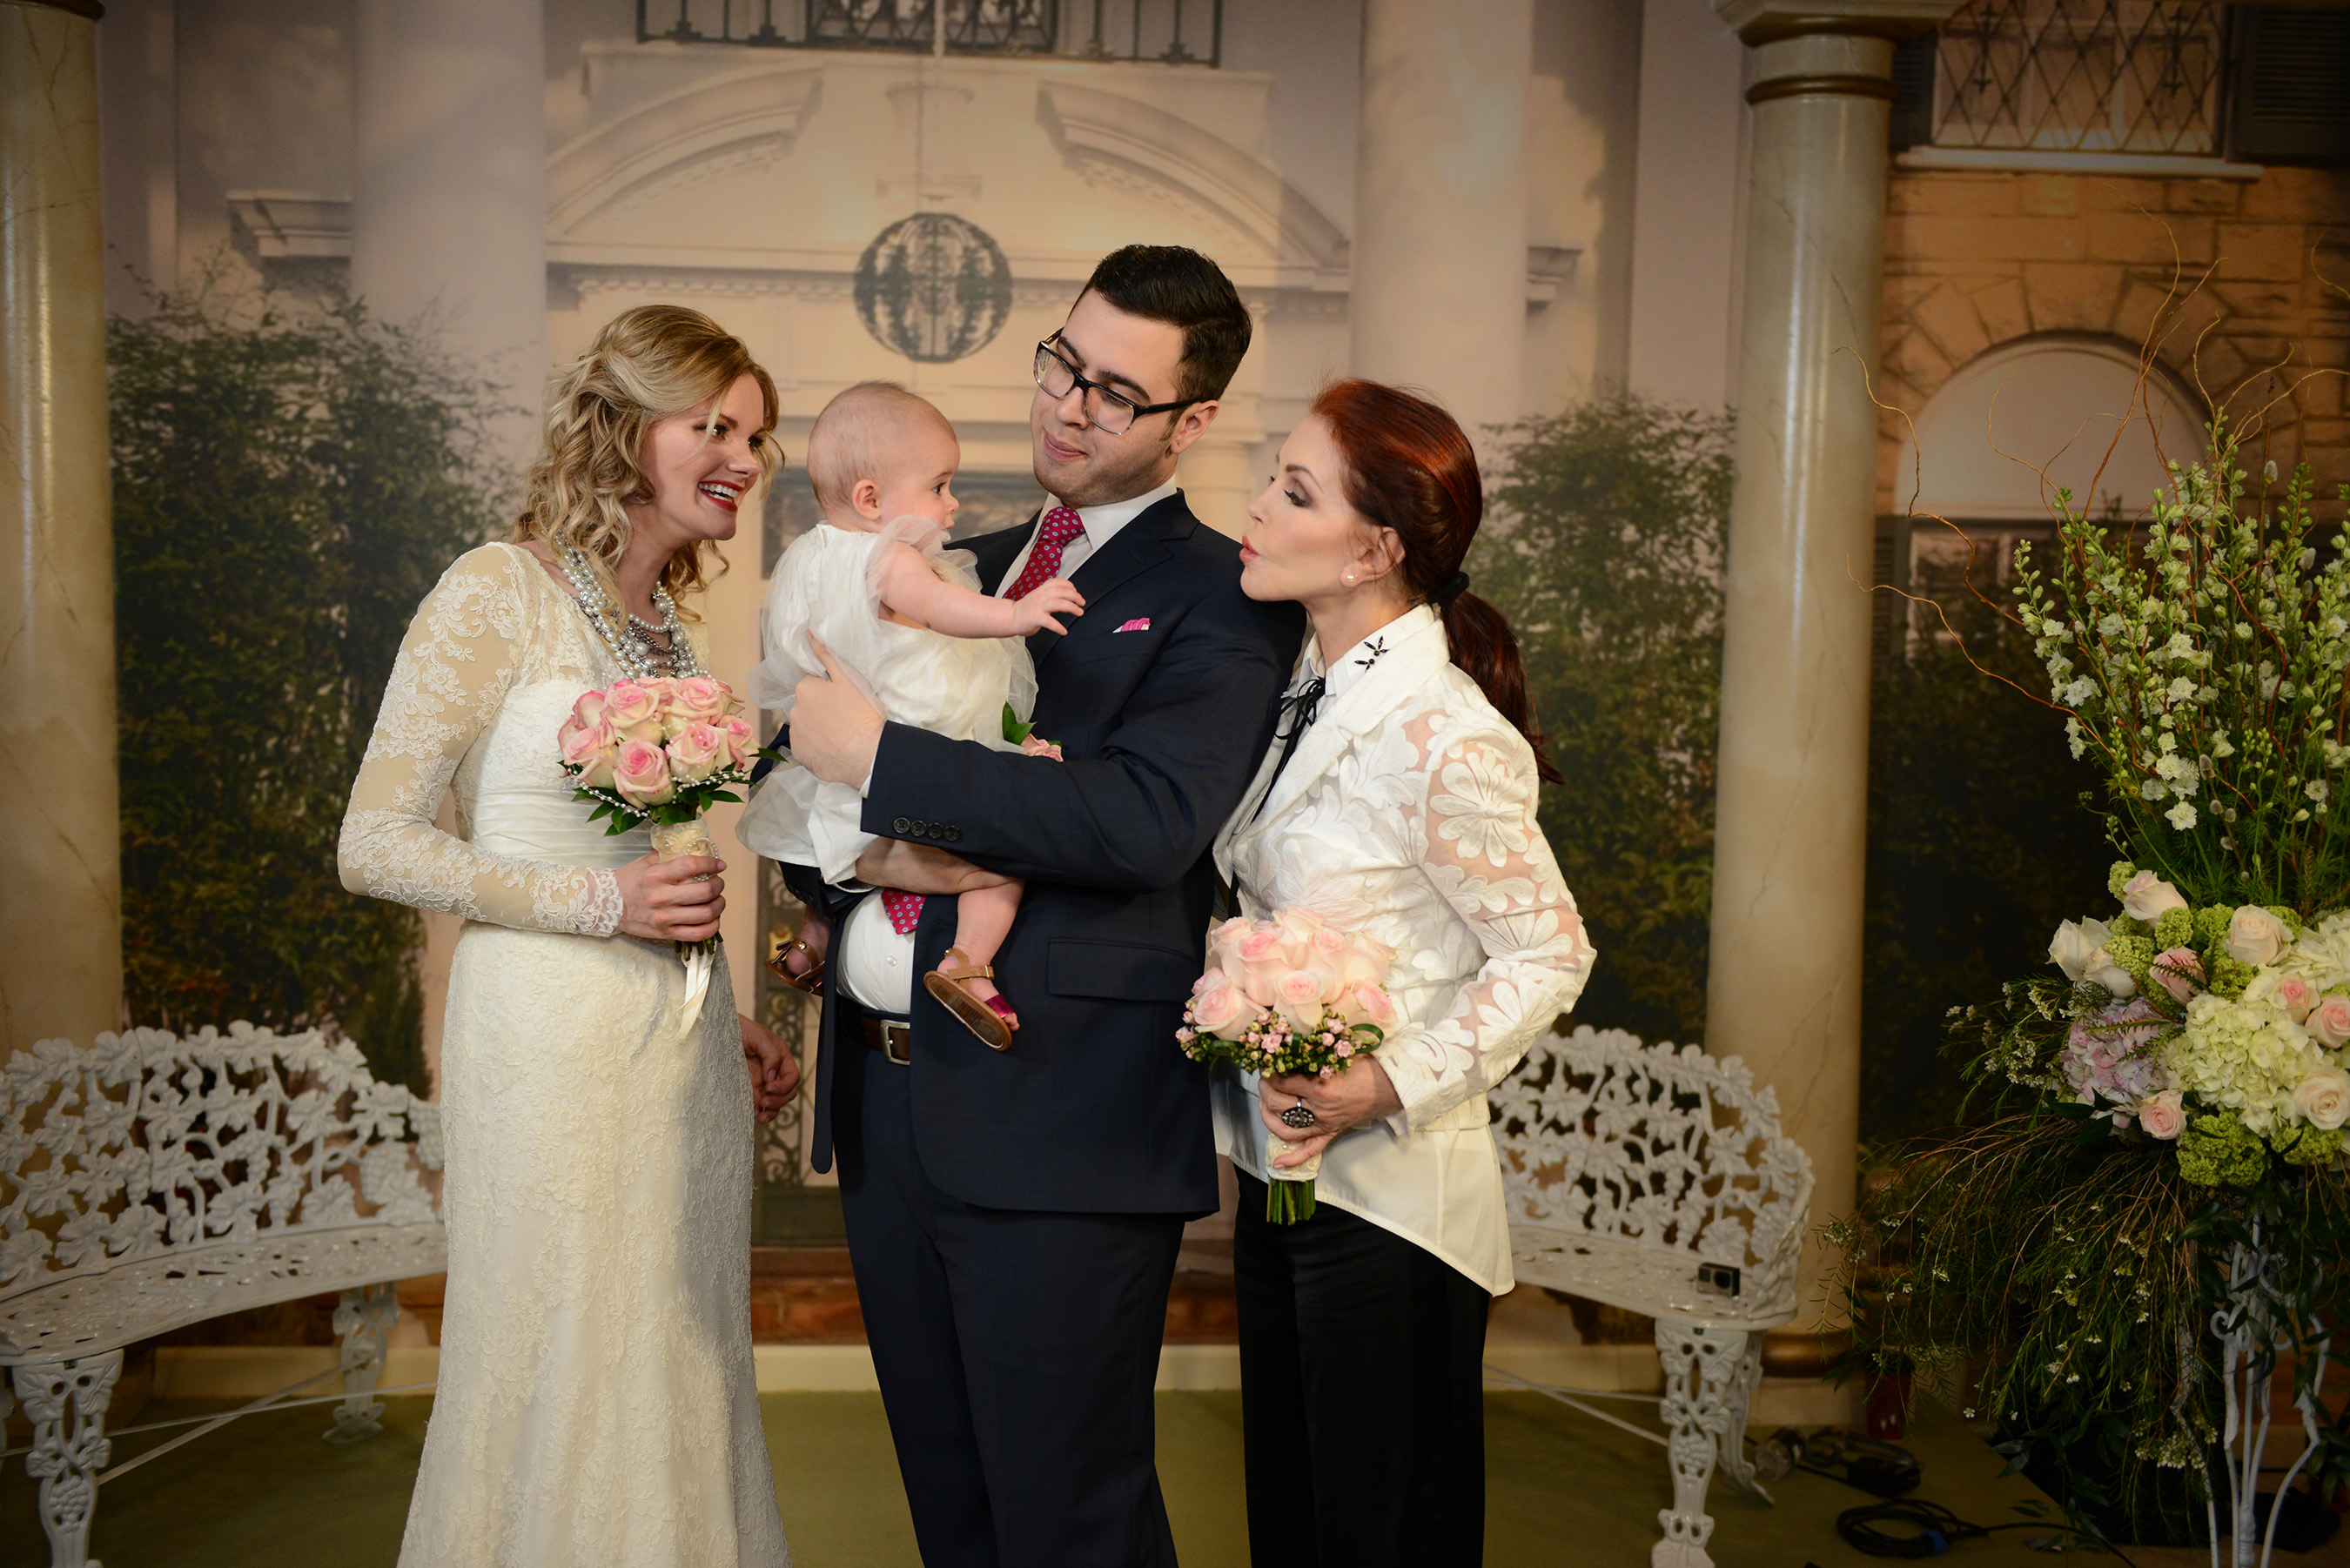 Priscilla Presley served as Matron of Honor for TODAY Show couple Kaycee Satava and Cameron Baker and their baby daughter Lucy in the first wedding held at Elvis Presley’s Graceland Wedding Chapel.